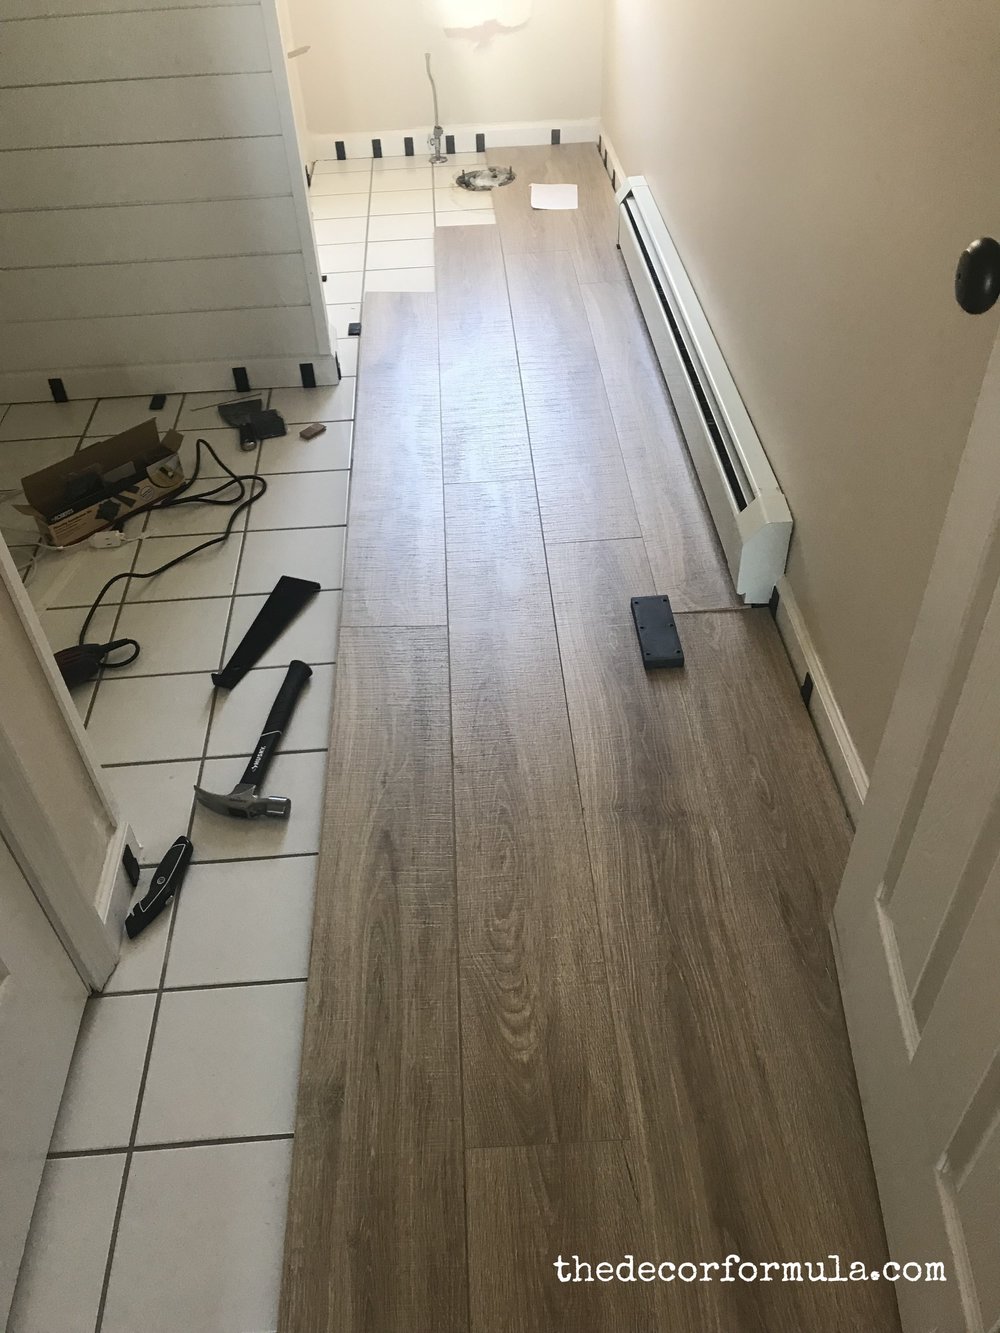 Ideas For Covering Up Tile Floors, How To Install Laminate Flooring Over Ceramic Tile